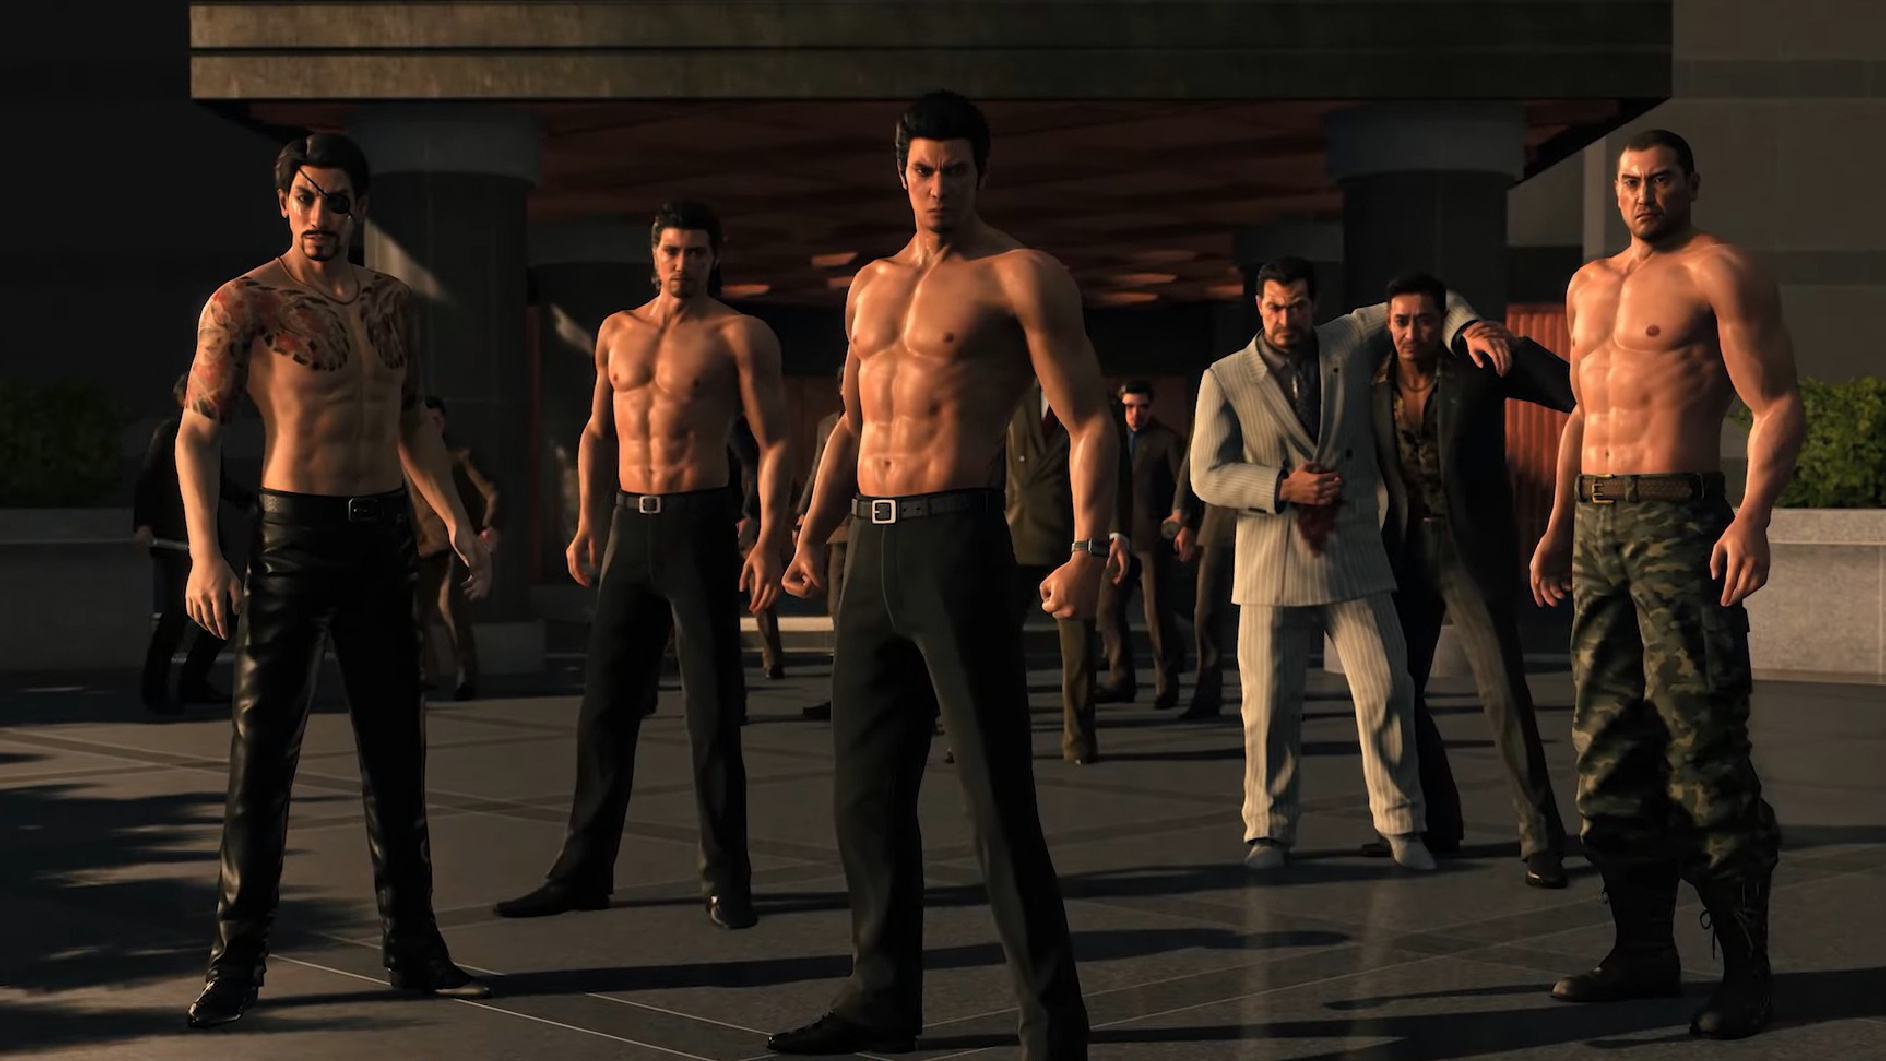 Kazuma Kiryu, Goro Majima, and other men from the Yakuza series stand shirtless in a still from Like A Dragon Gaiden: The Man Who Erased His Name